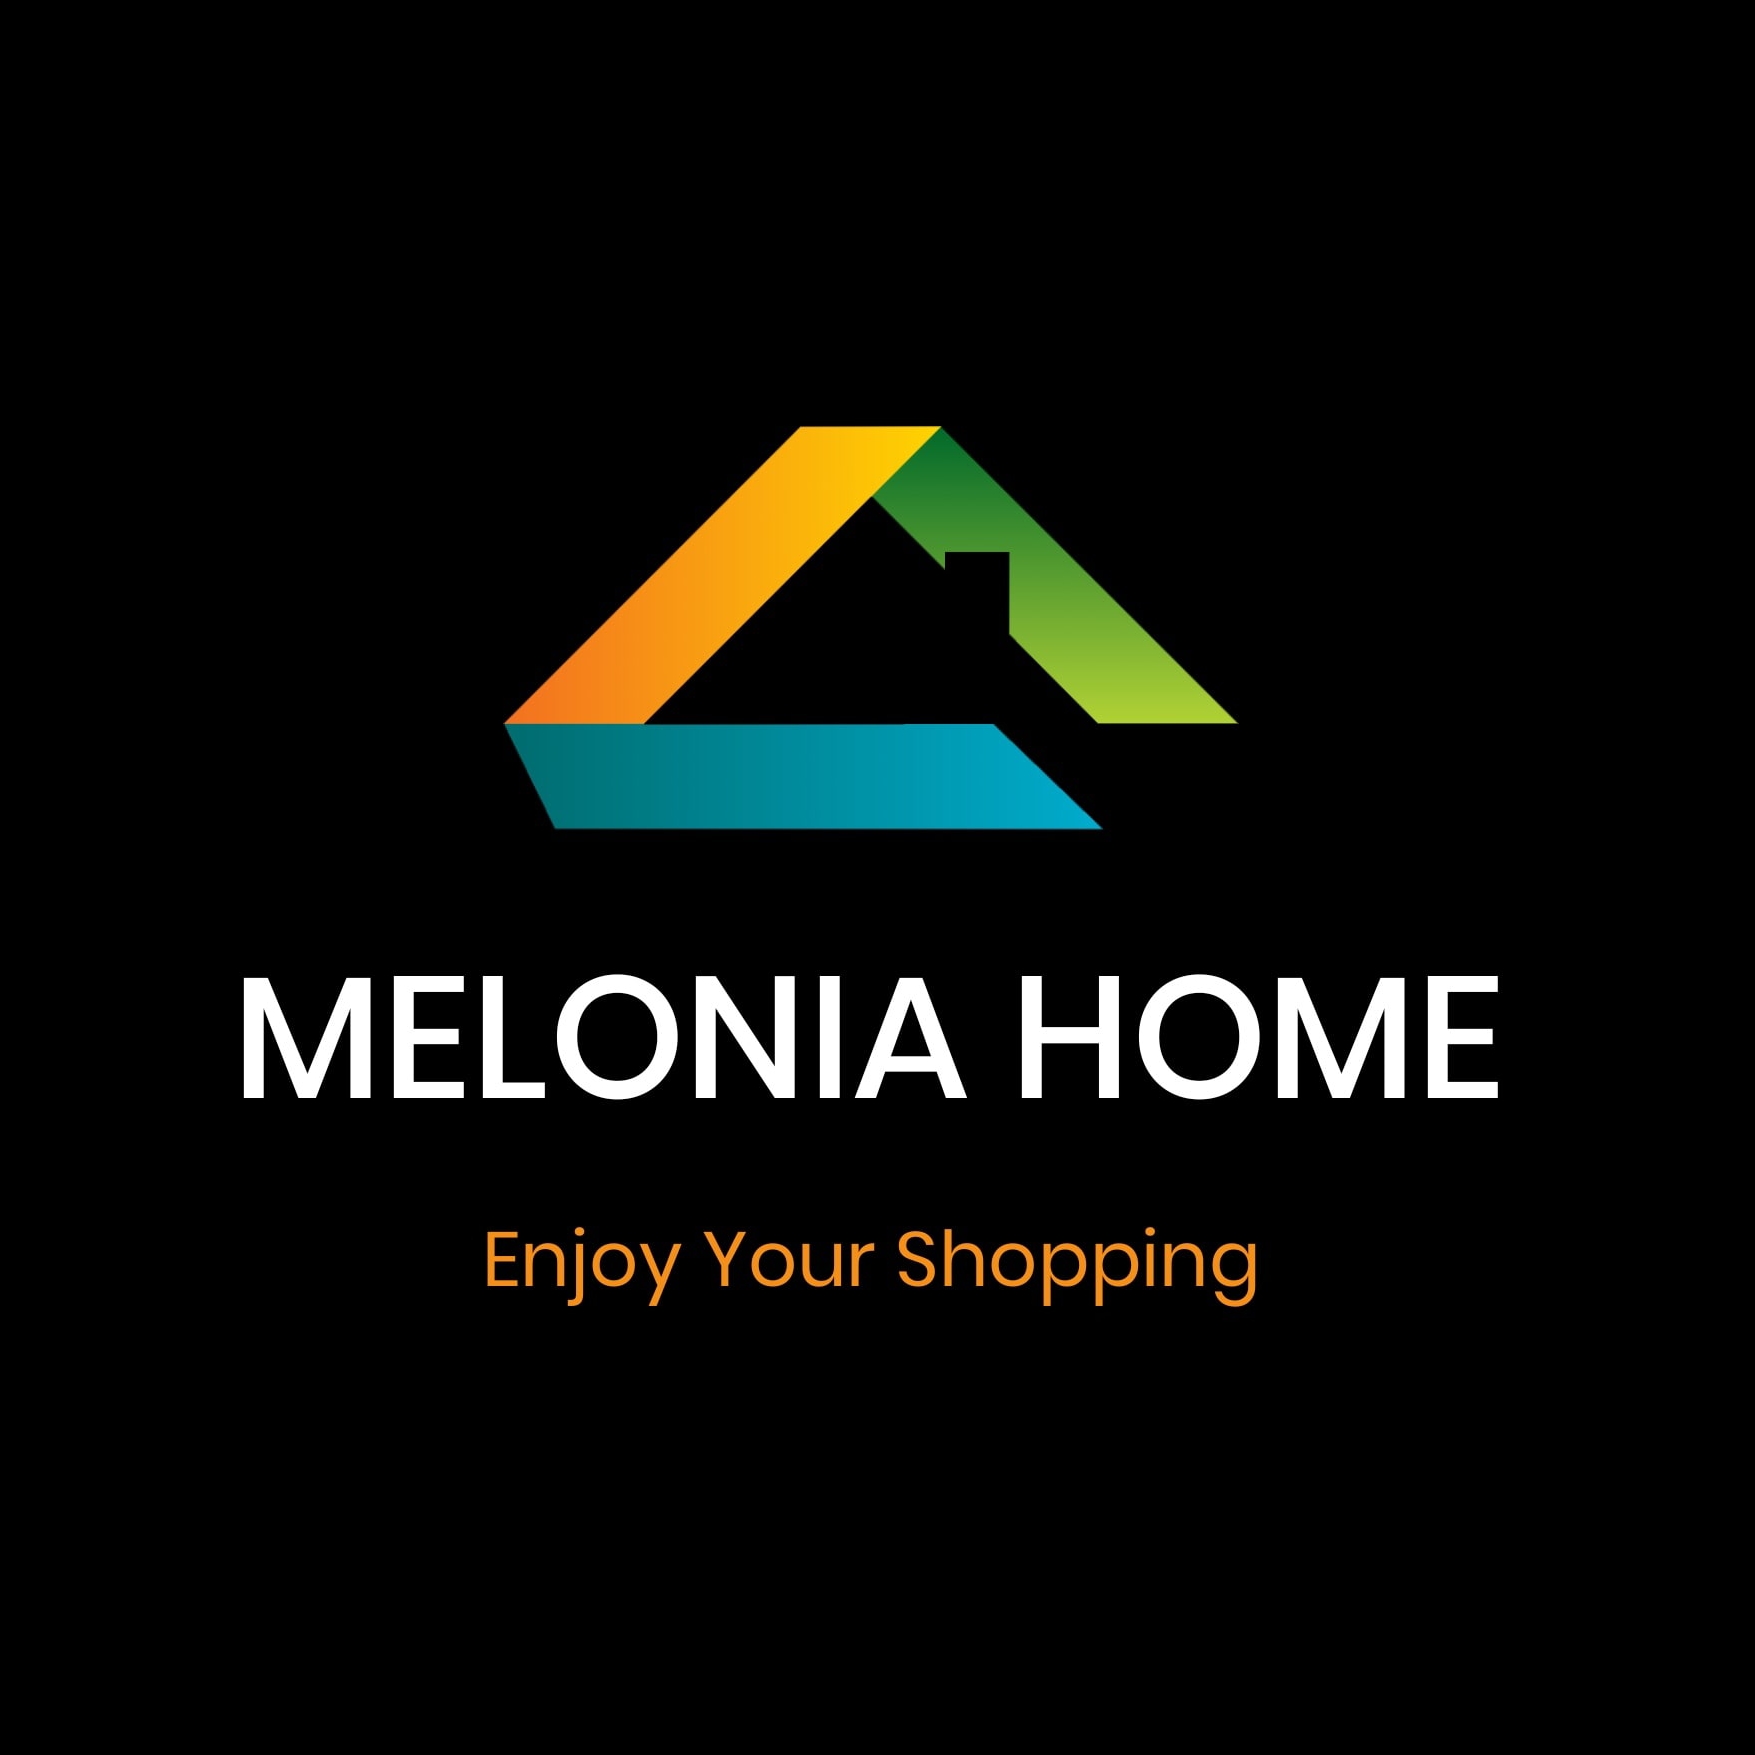 MELONIA HOME